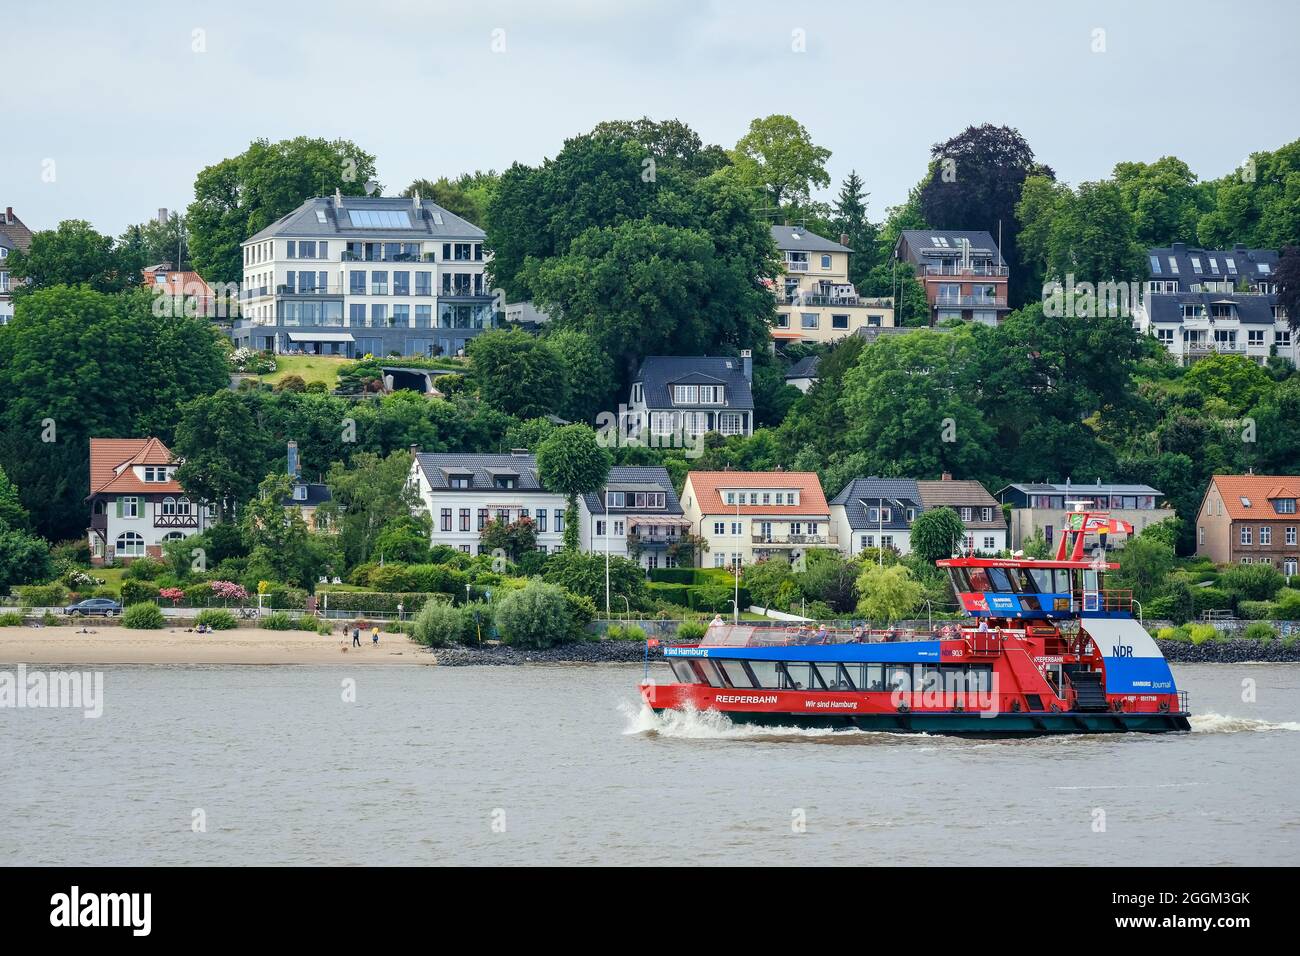 Hamburg, Germany - Residential houses on the sandy Elbe beach in the affluent residential area in Othmarschen, in front a harbor ferry, the Reeperbahn liner boat. Stock Photo